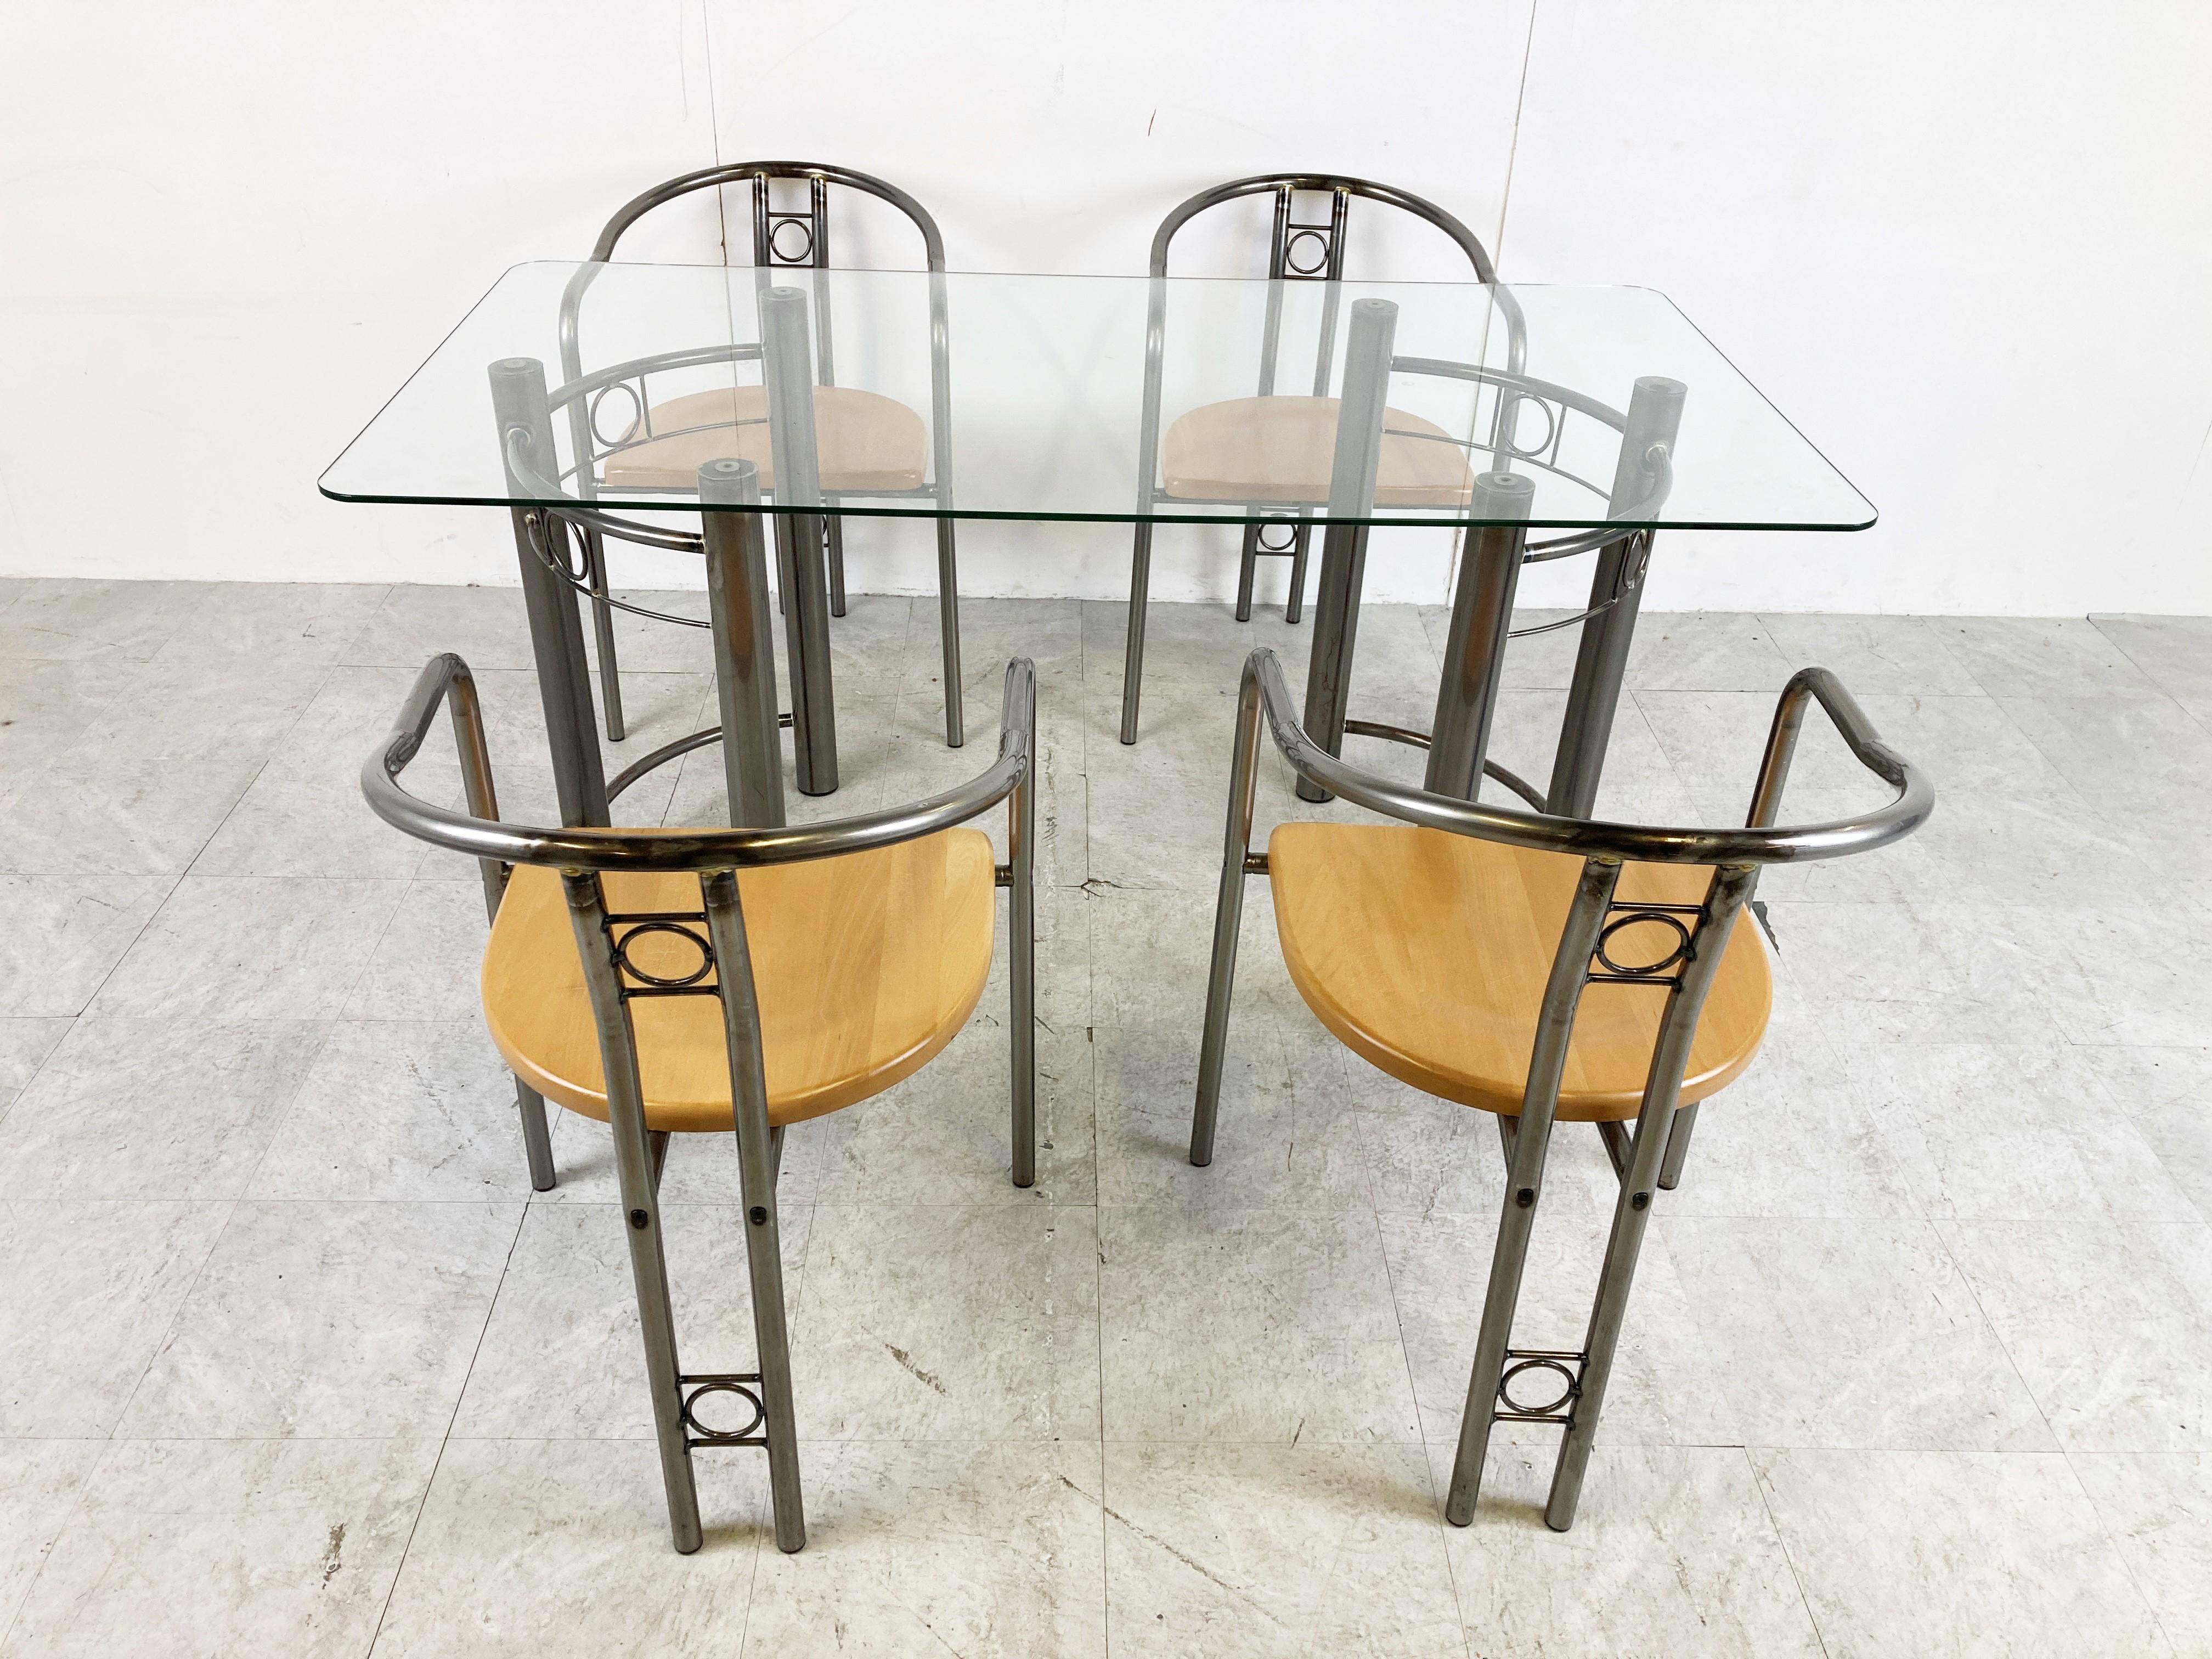 Vintage custom made dining chairs with armrests and dining table with a clear glass top.

The chairs have a wooden seat.

Beautifully manufactured designed post modern dining set

1980s - Belgium

Good